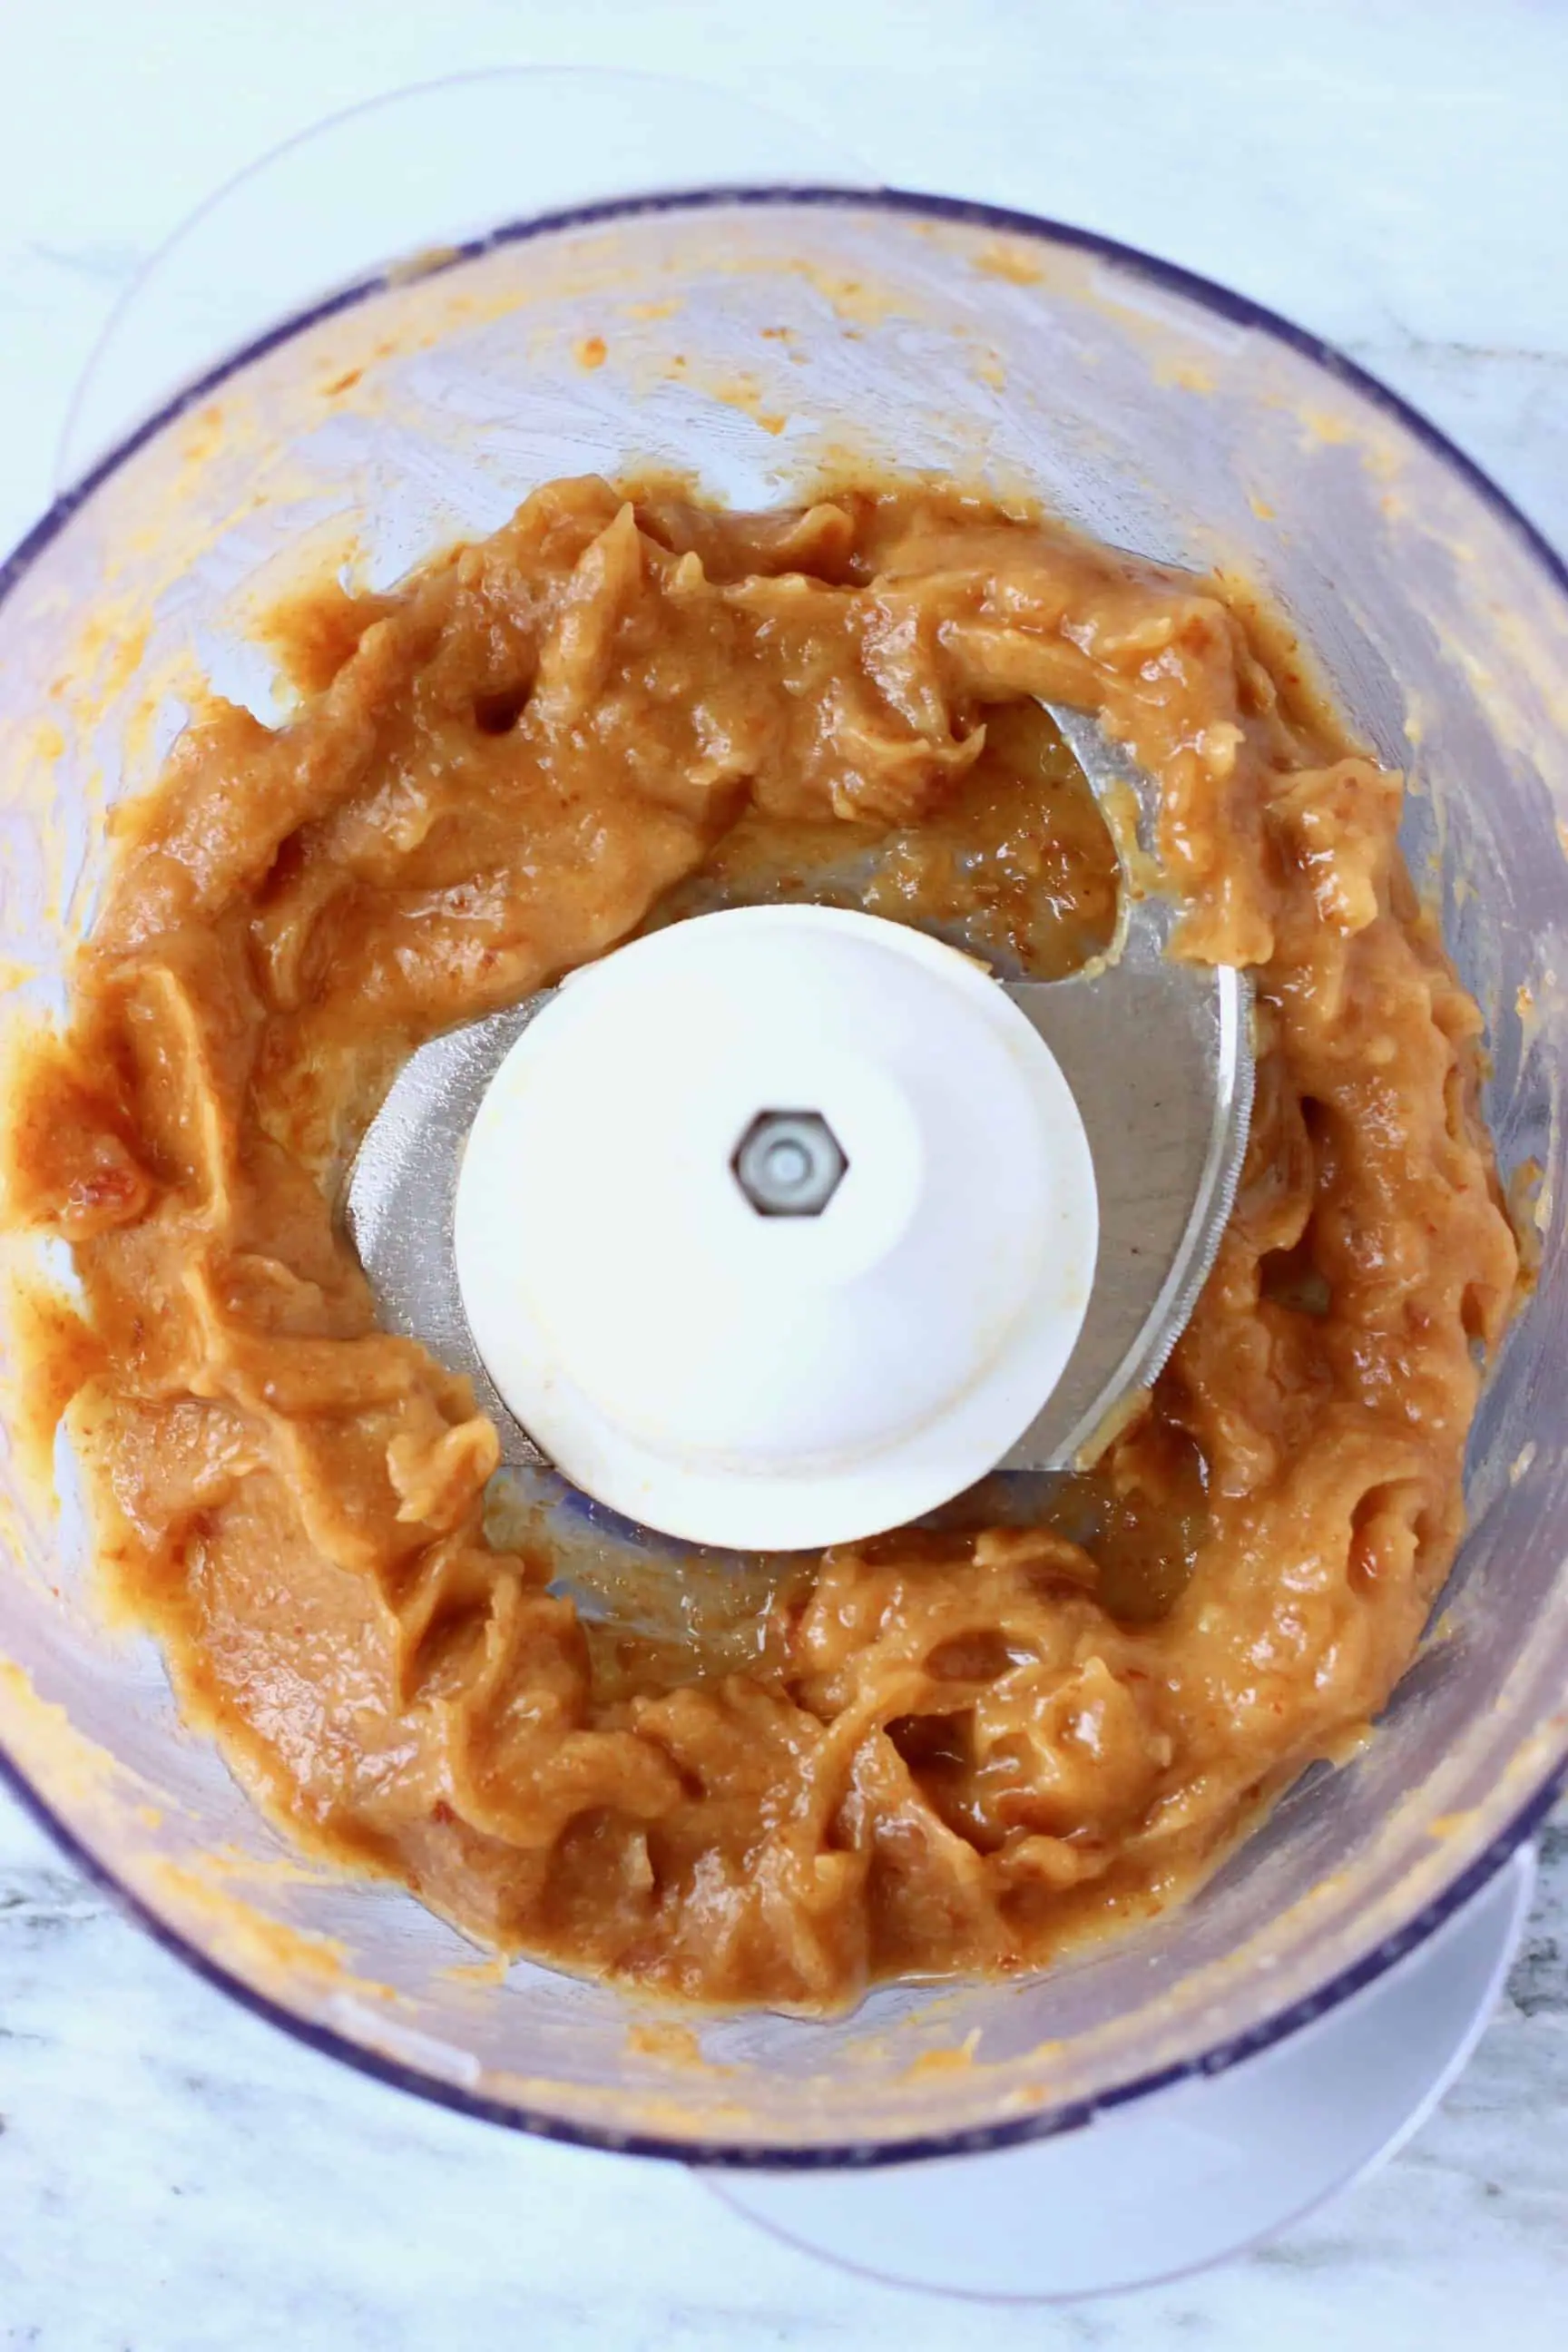 Date paste in a food processor against a marble background